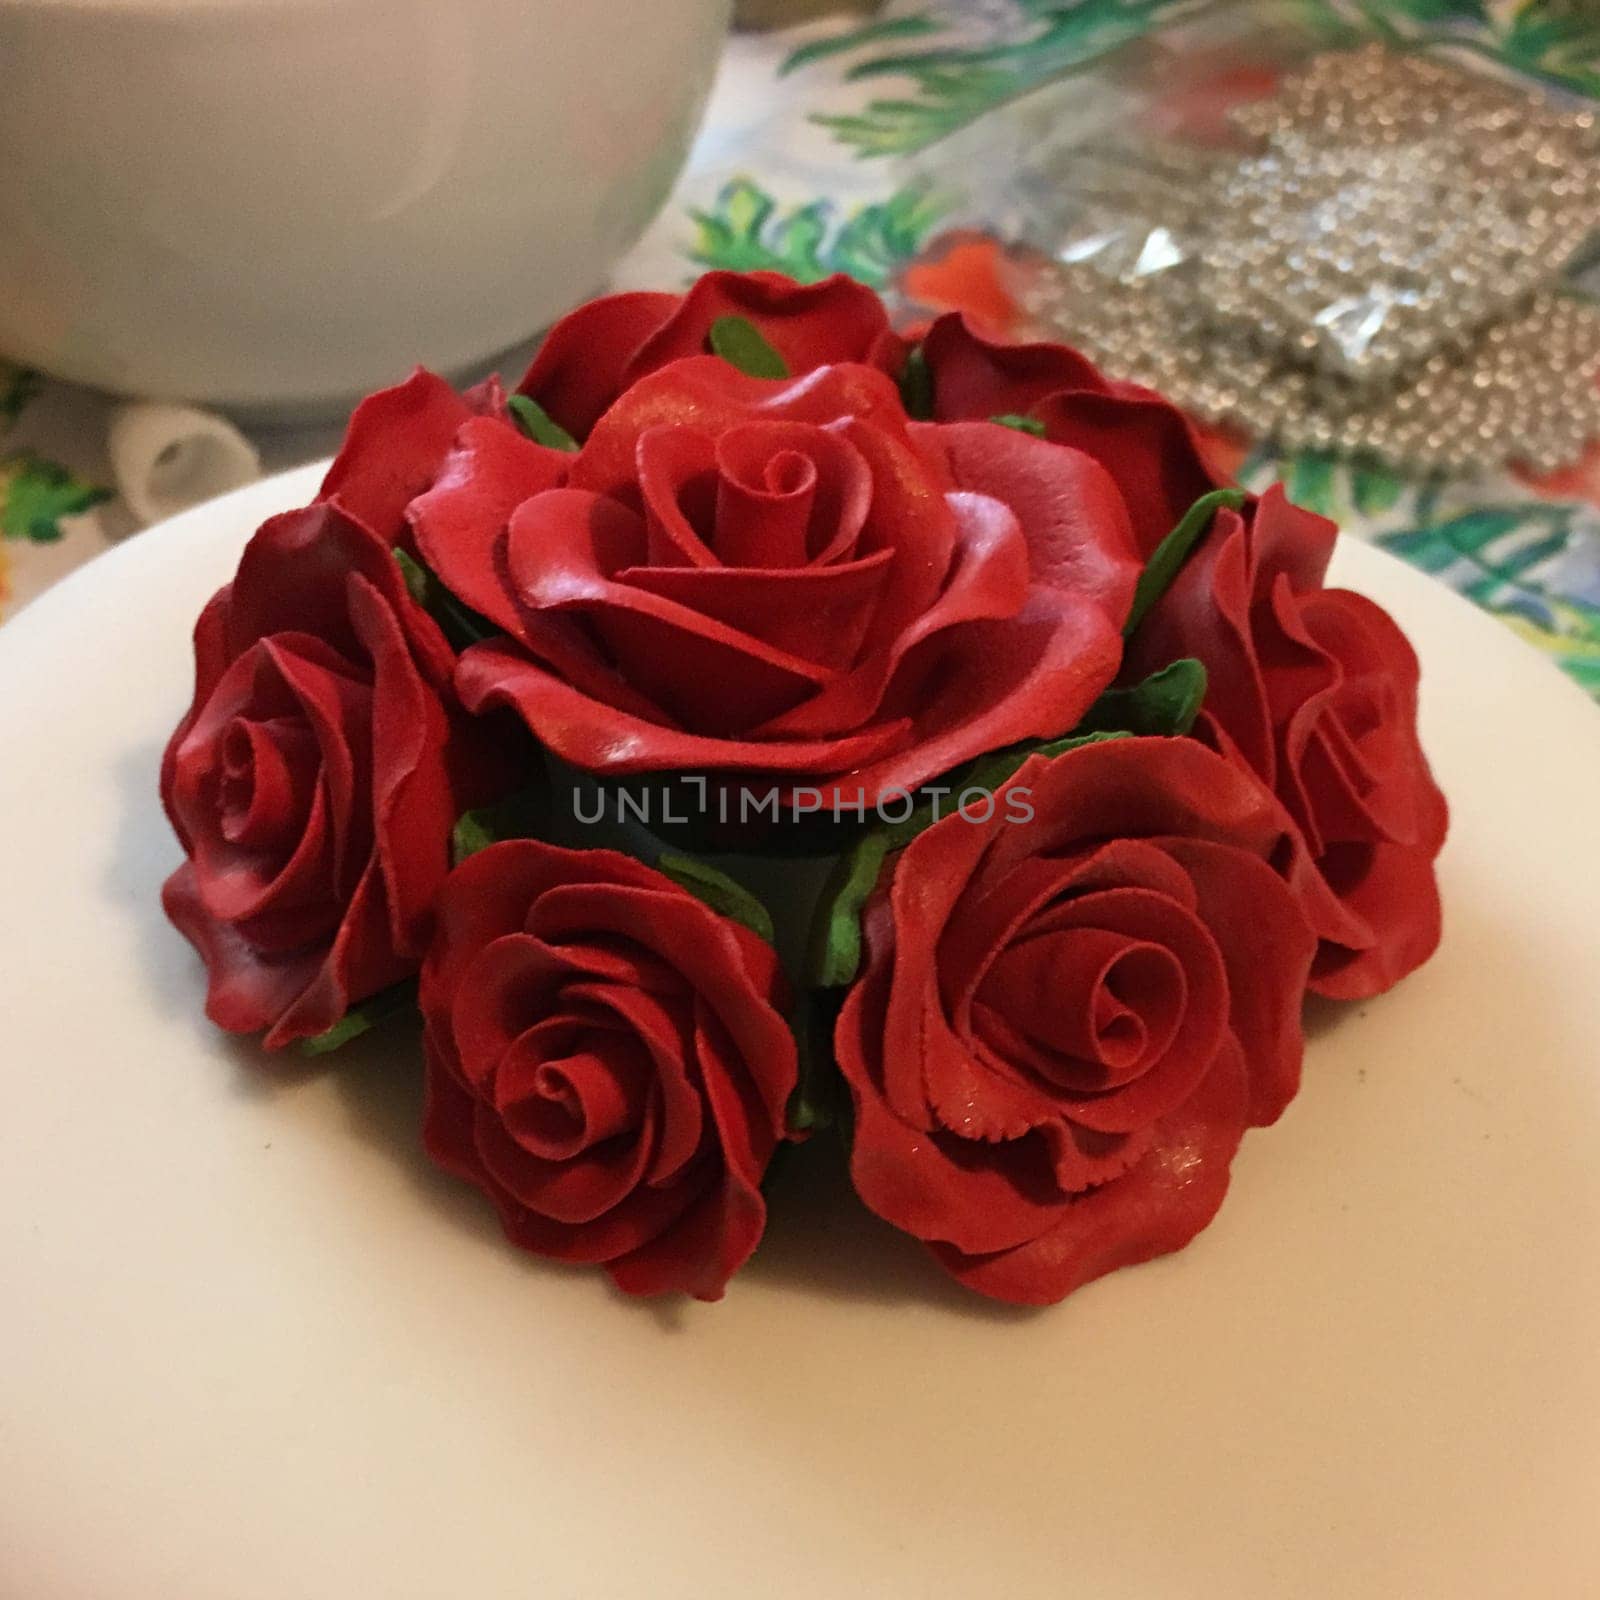 A close-up of a decorative arrangement of red roses made from fondant, placed on a white surface.